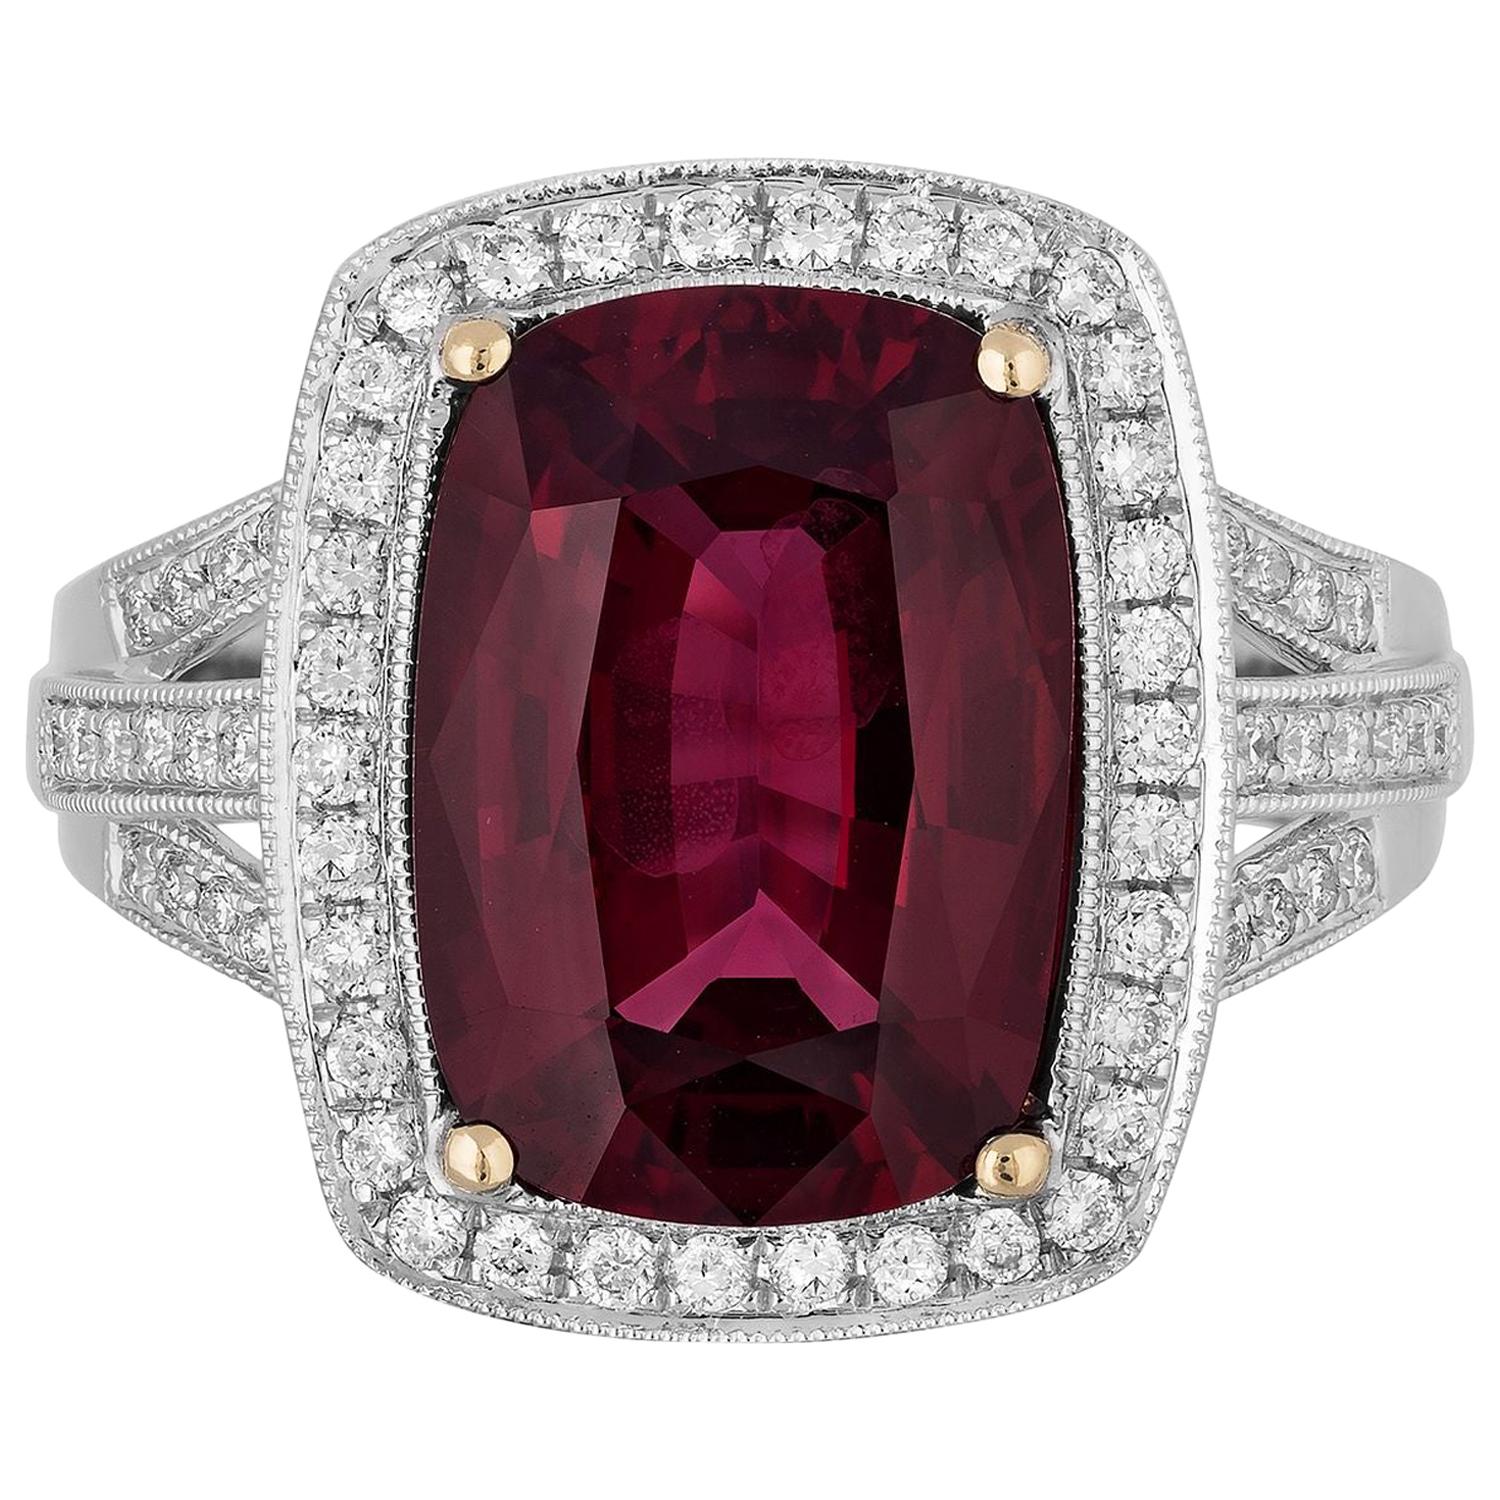 5.43 Carat Cushion Shape Red Spinel Diamonds Cocktail Ring